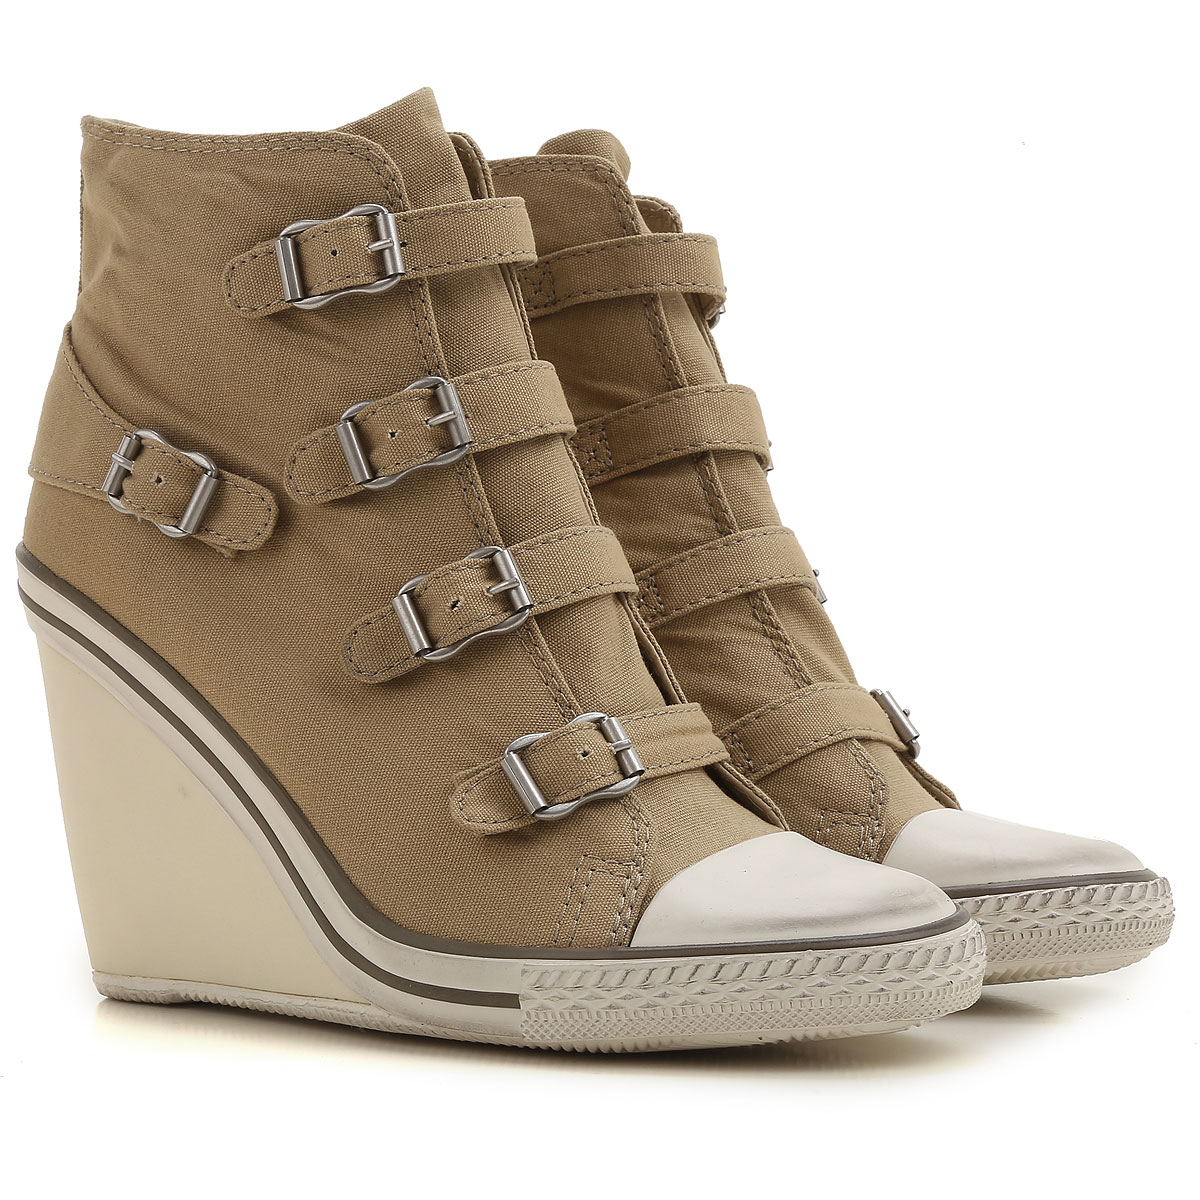 Womens Shoes Ash, Style code: thelmabis-desert-9577